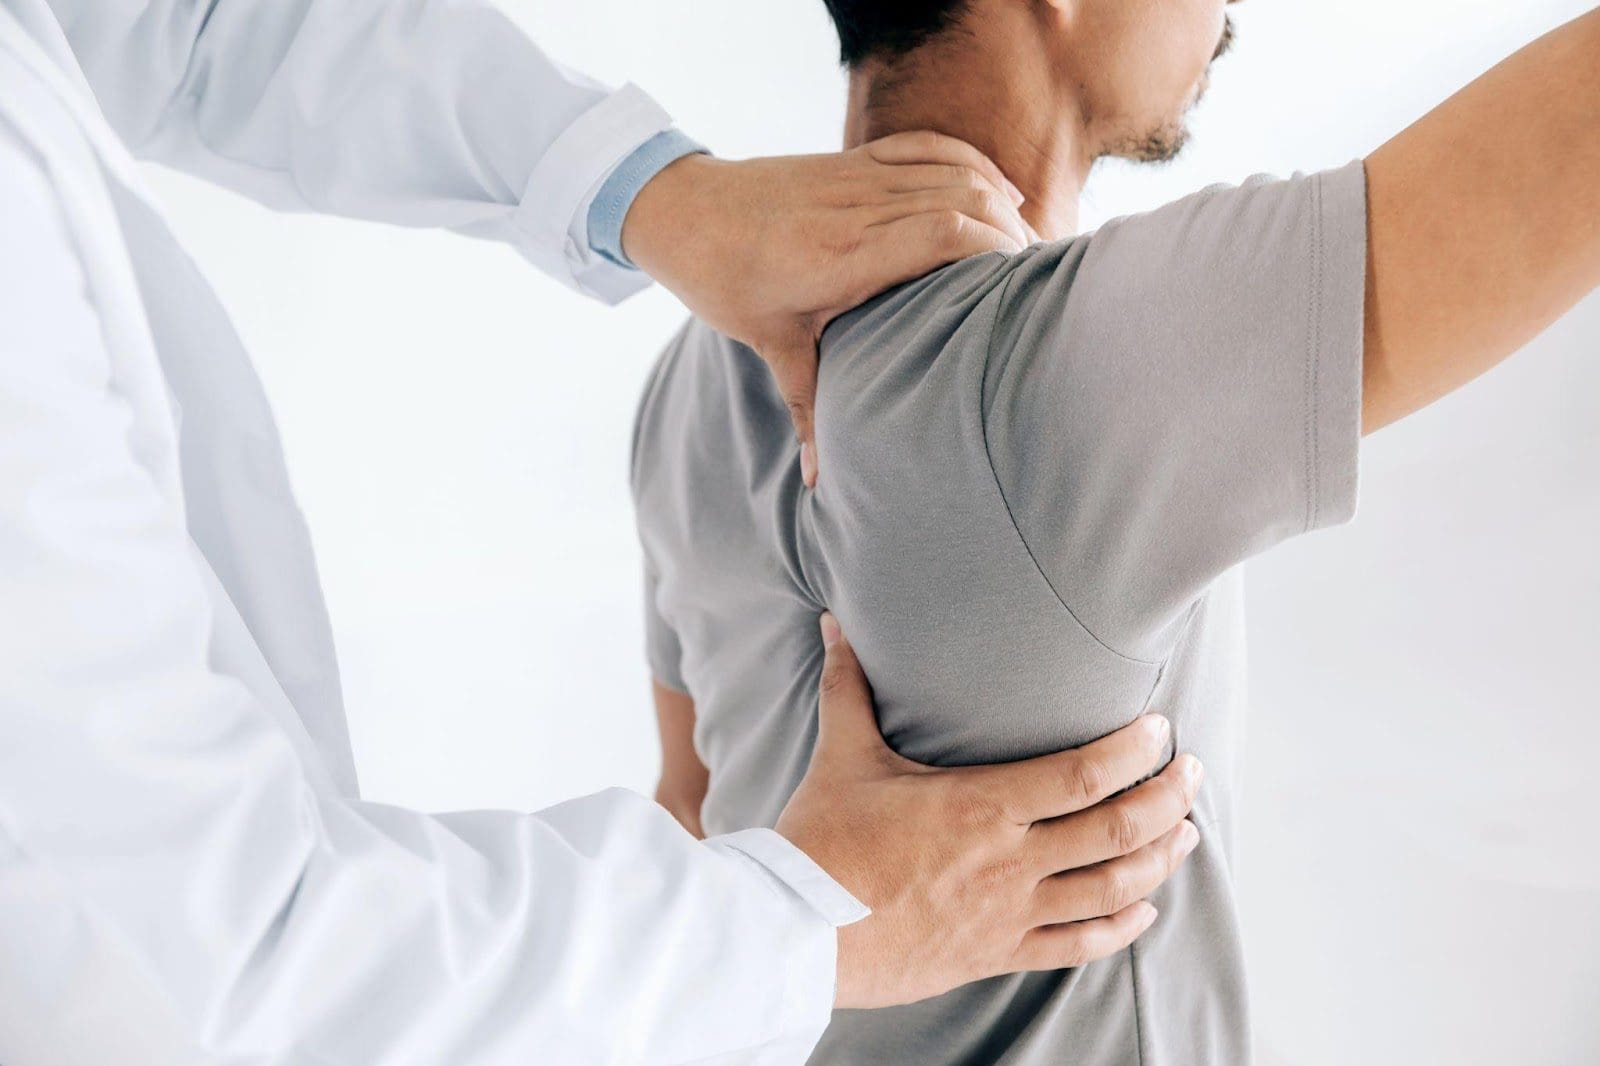 Chiropractor adjusting young male patient's shoulder.
